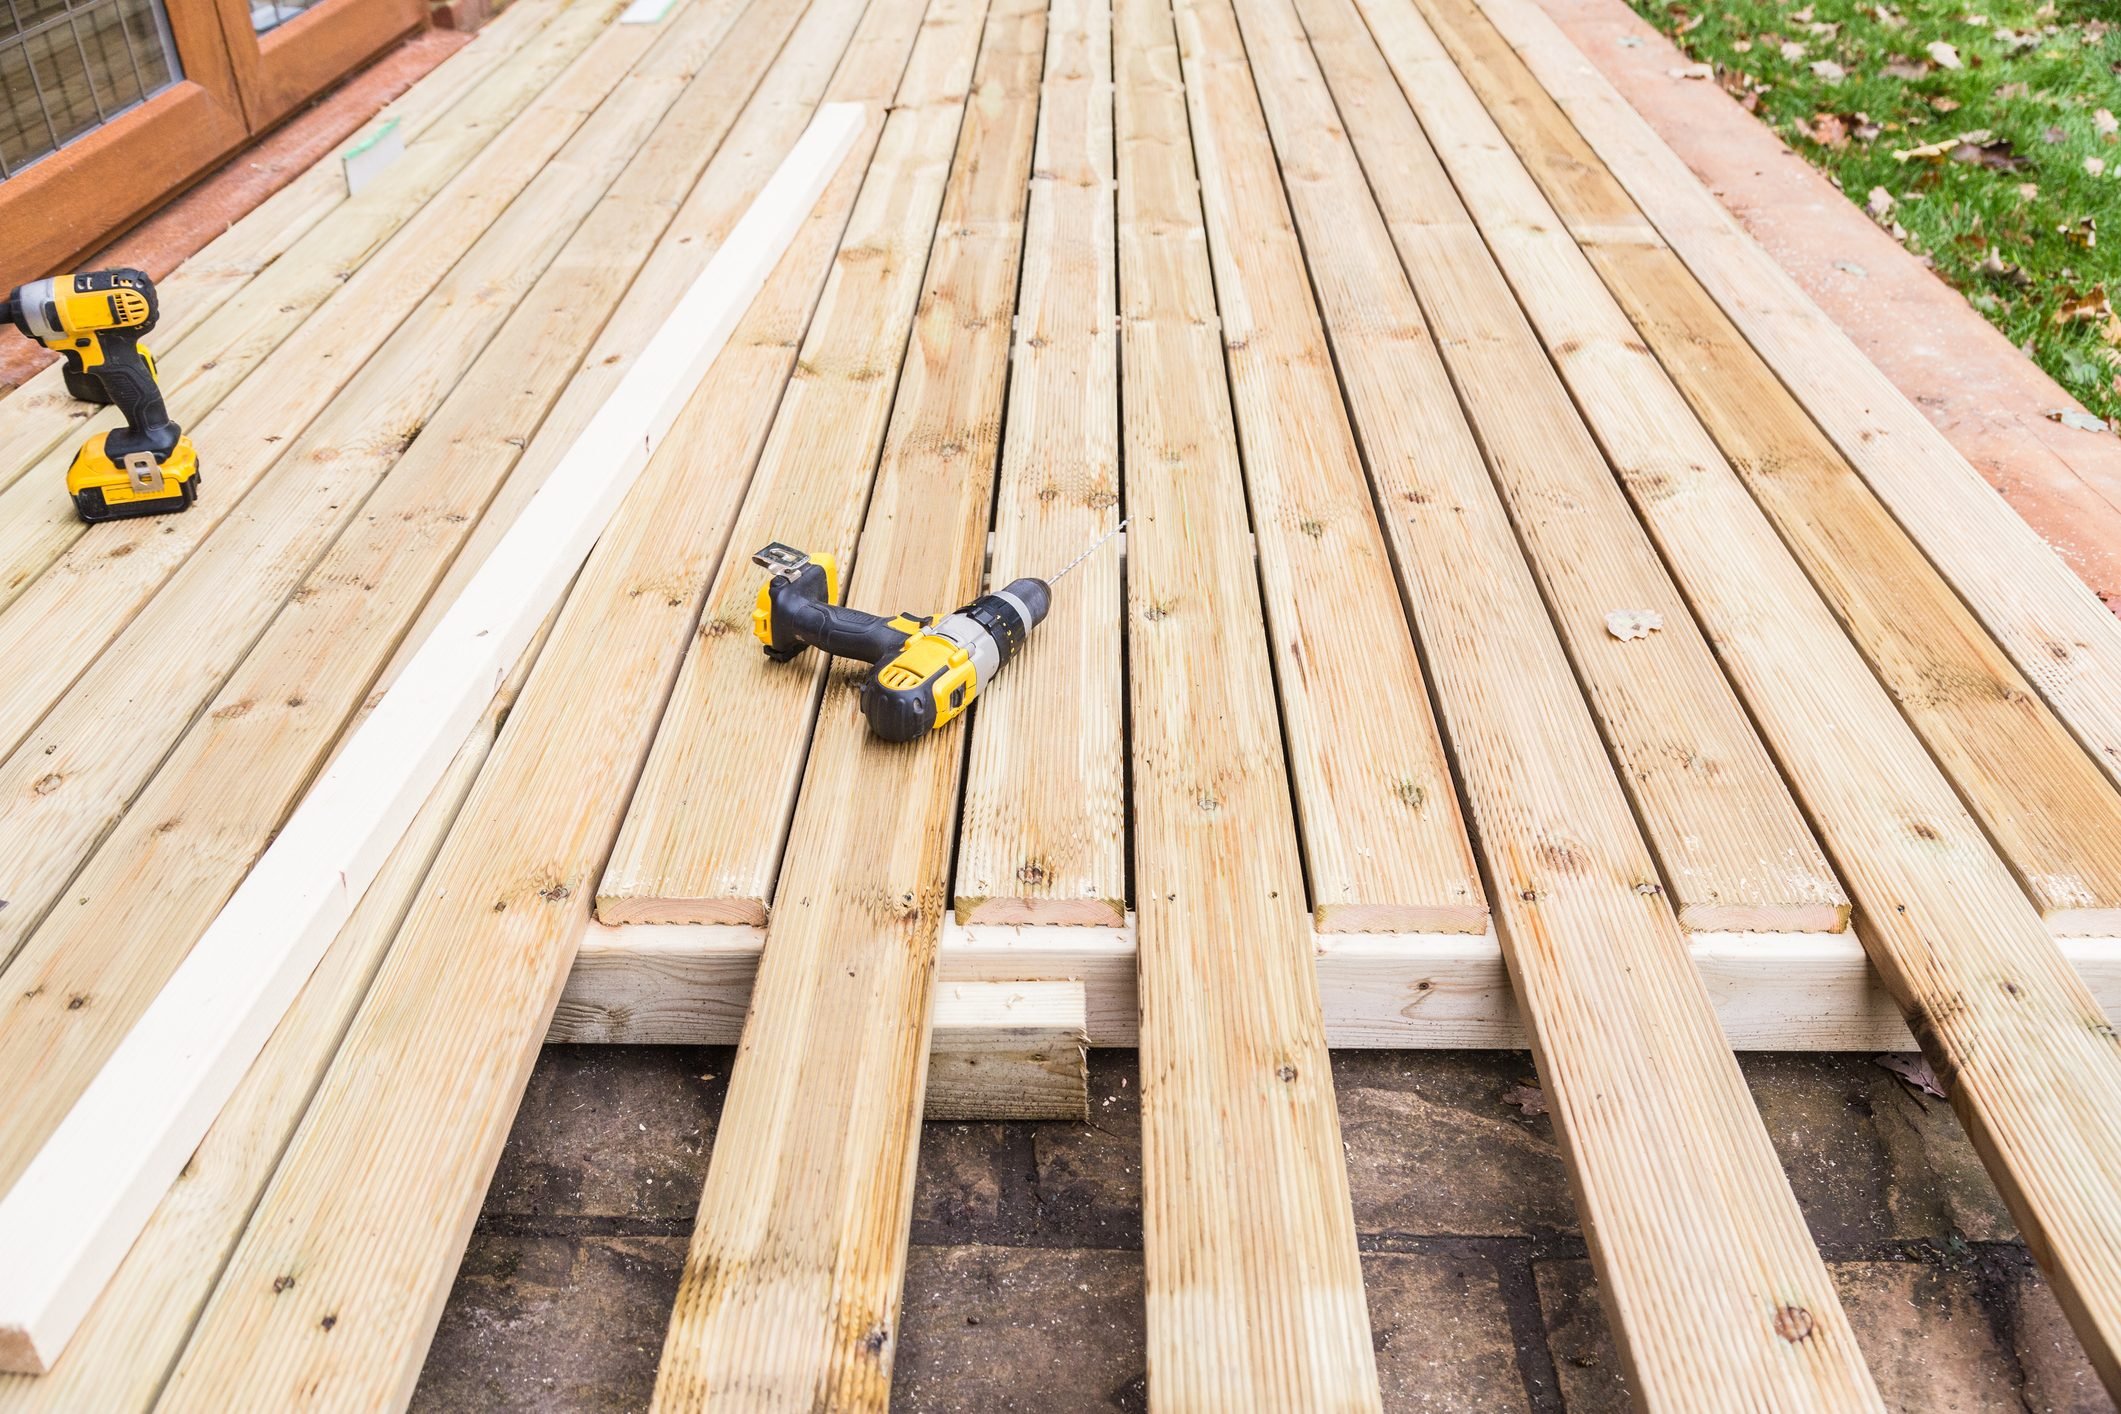 10 Tips for Choosing and Buying Deck Lumber